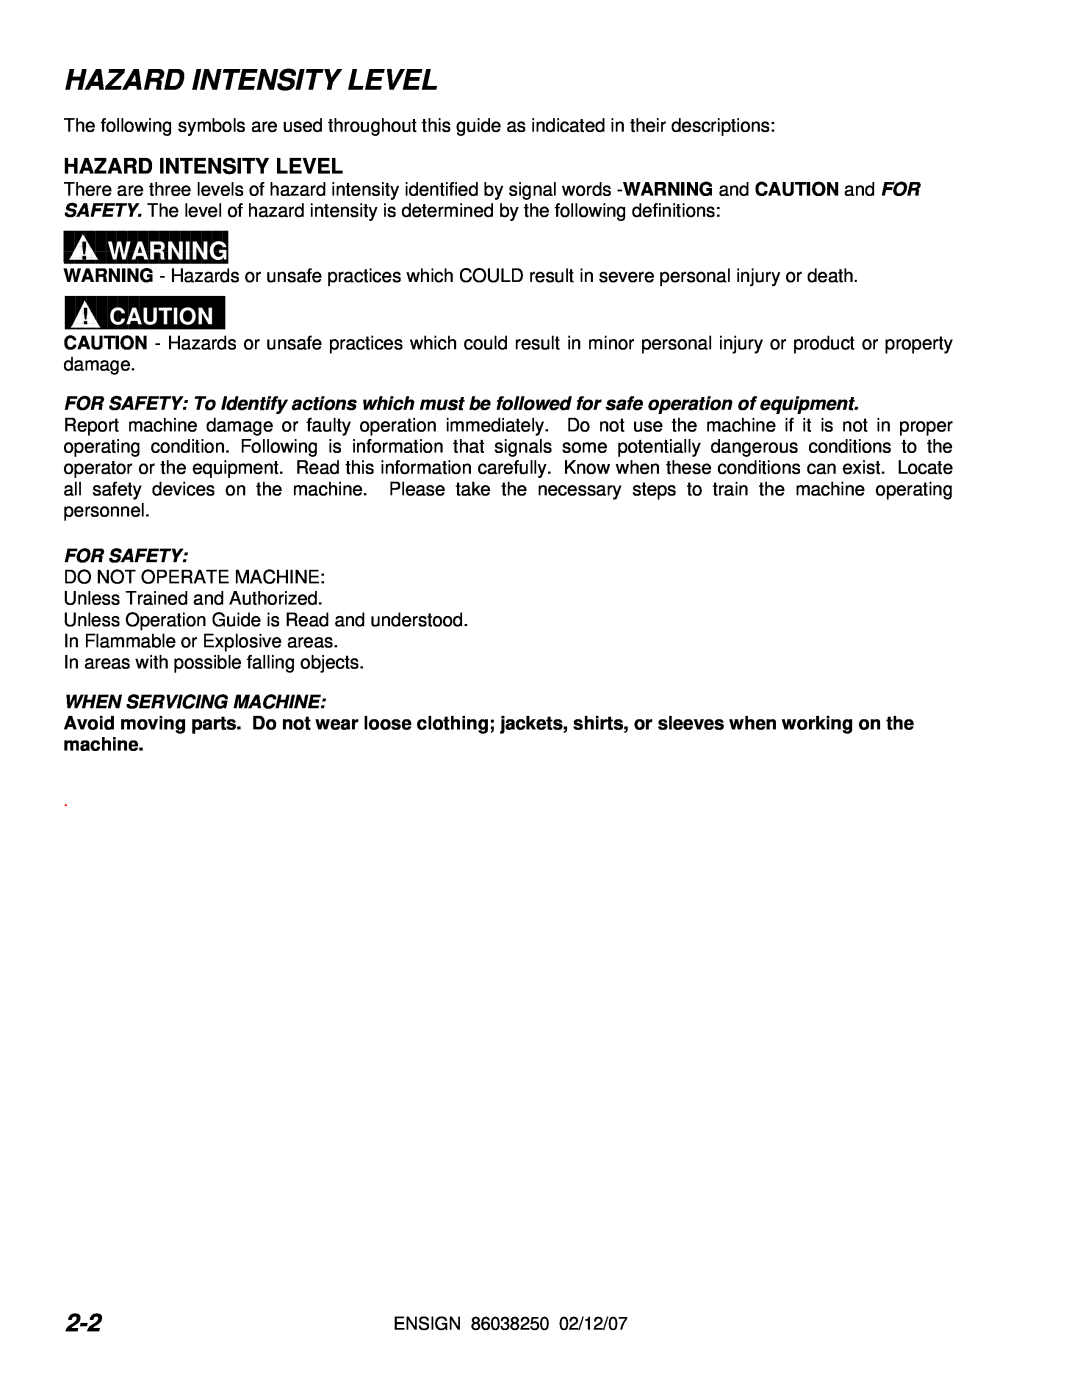 Windsor E50 10070090 operating instructions Hazard Intensity Level, For Safety, When Servicing Machine 